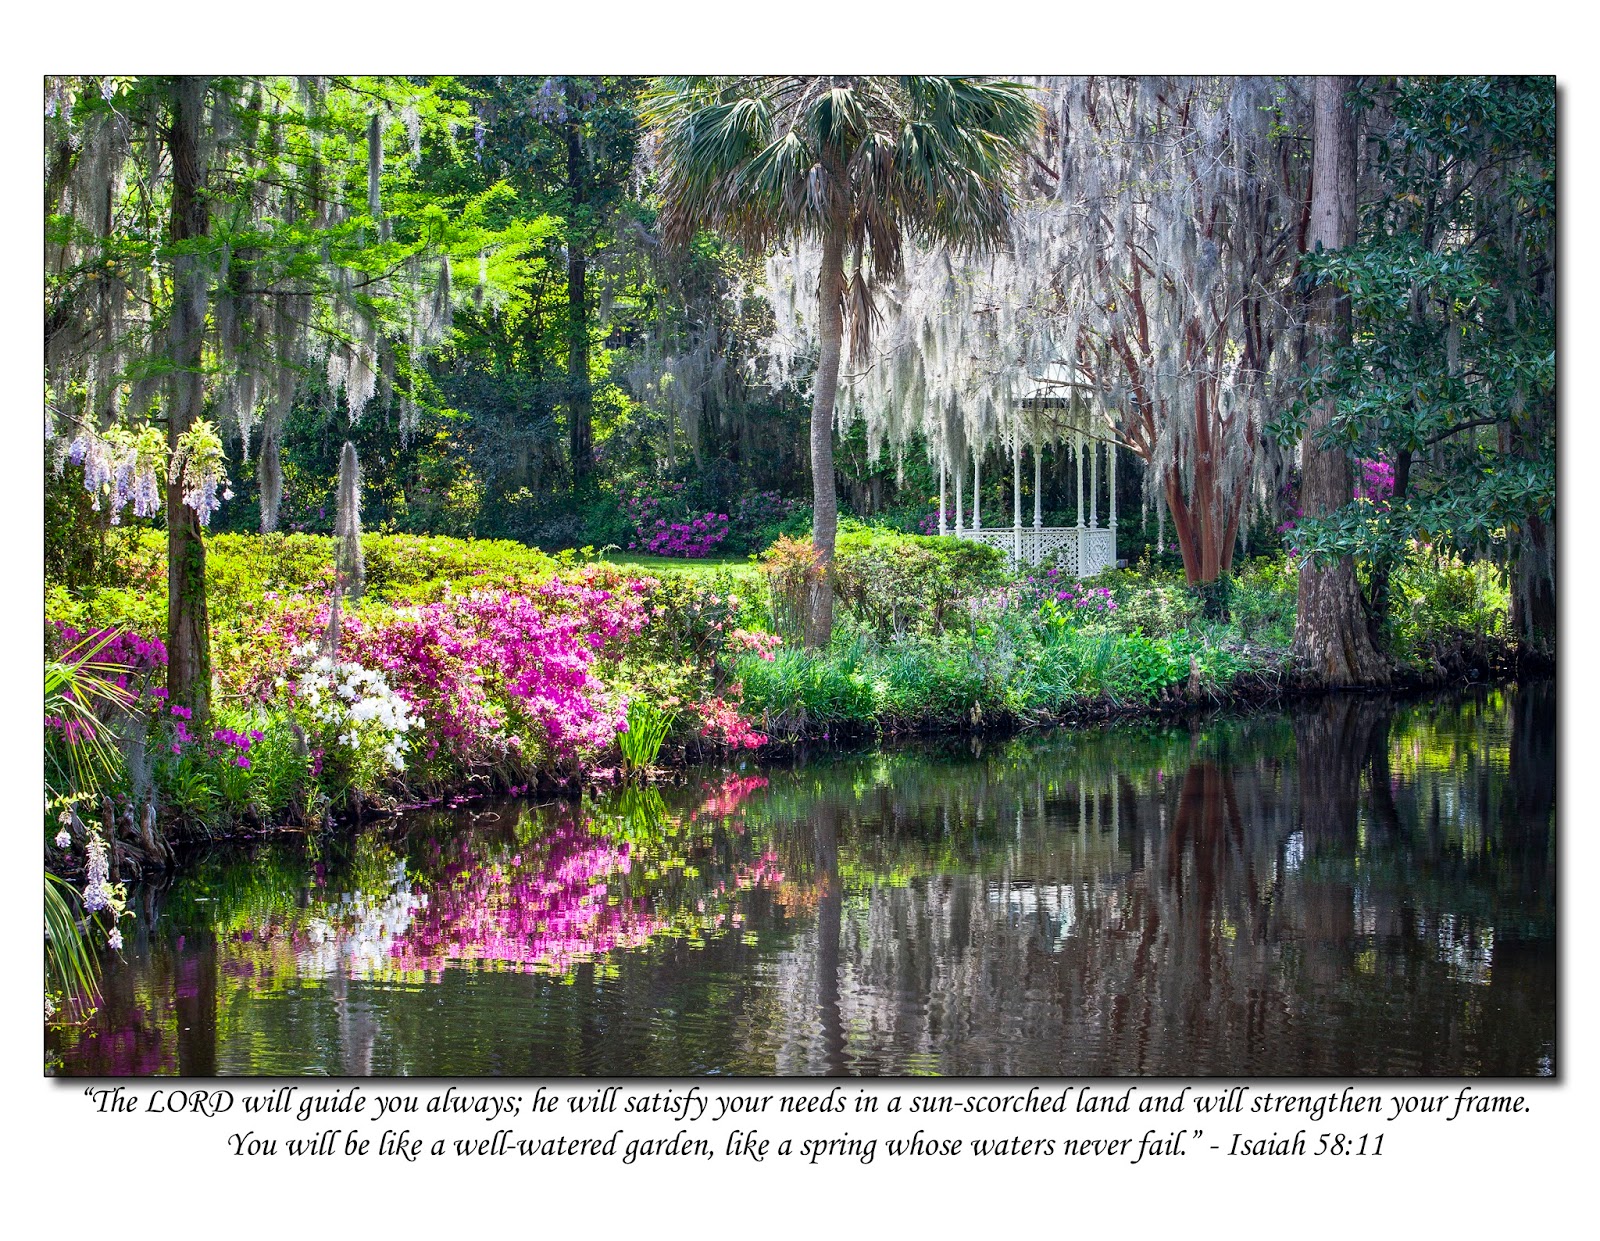 The Siggins Photography Blog: A Well-Watered Garden